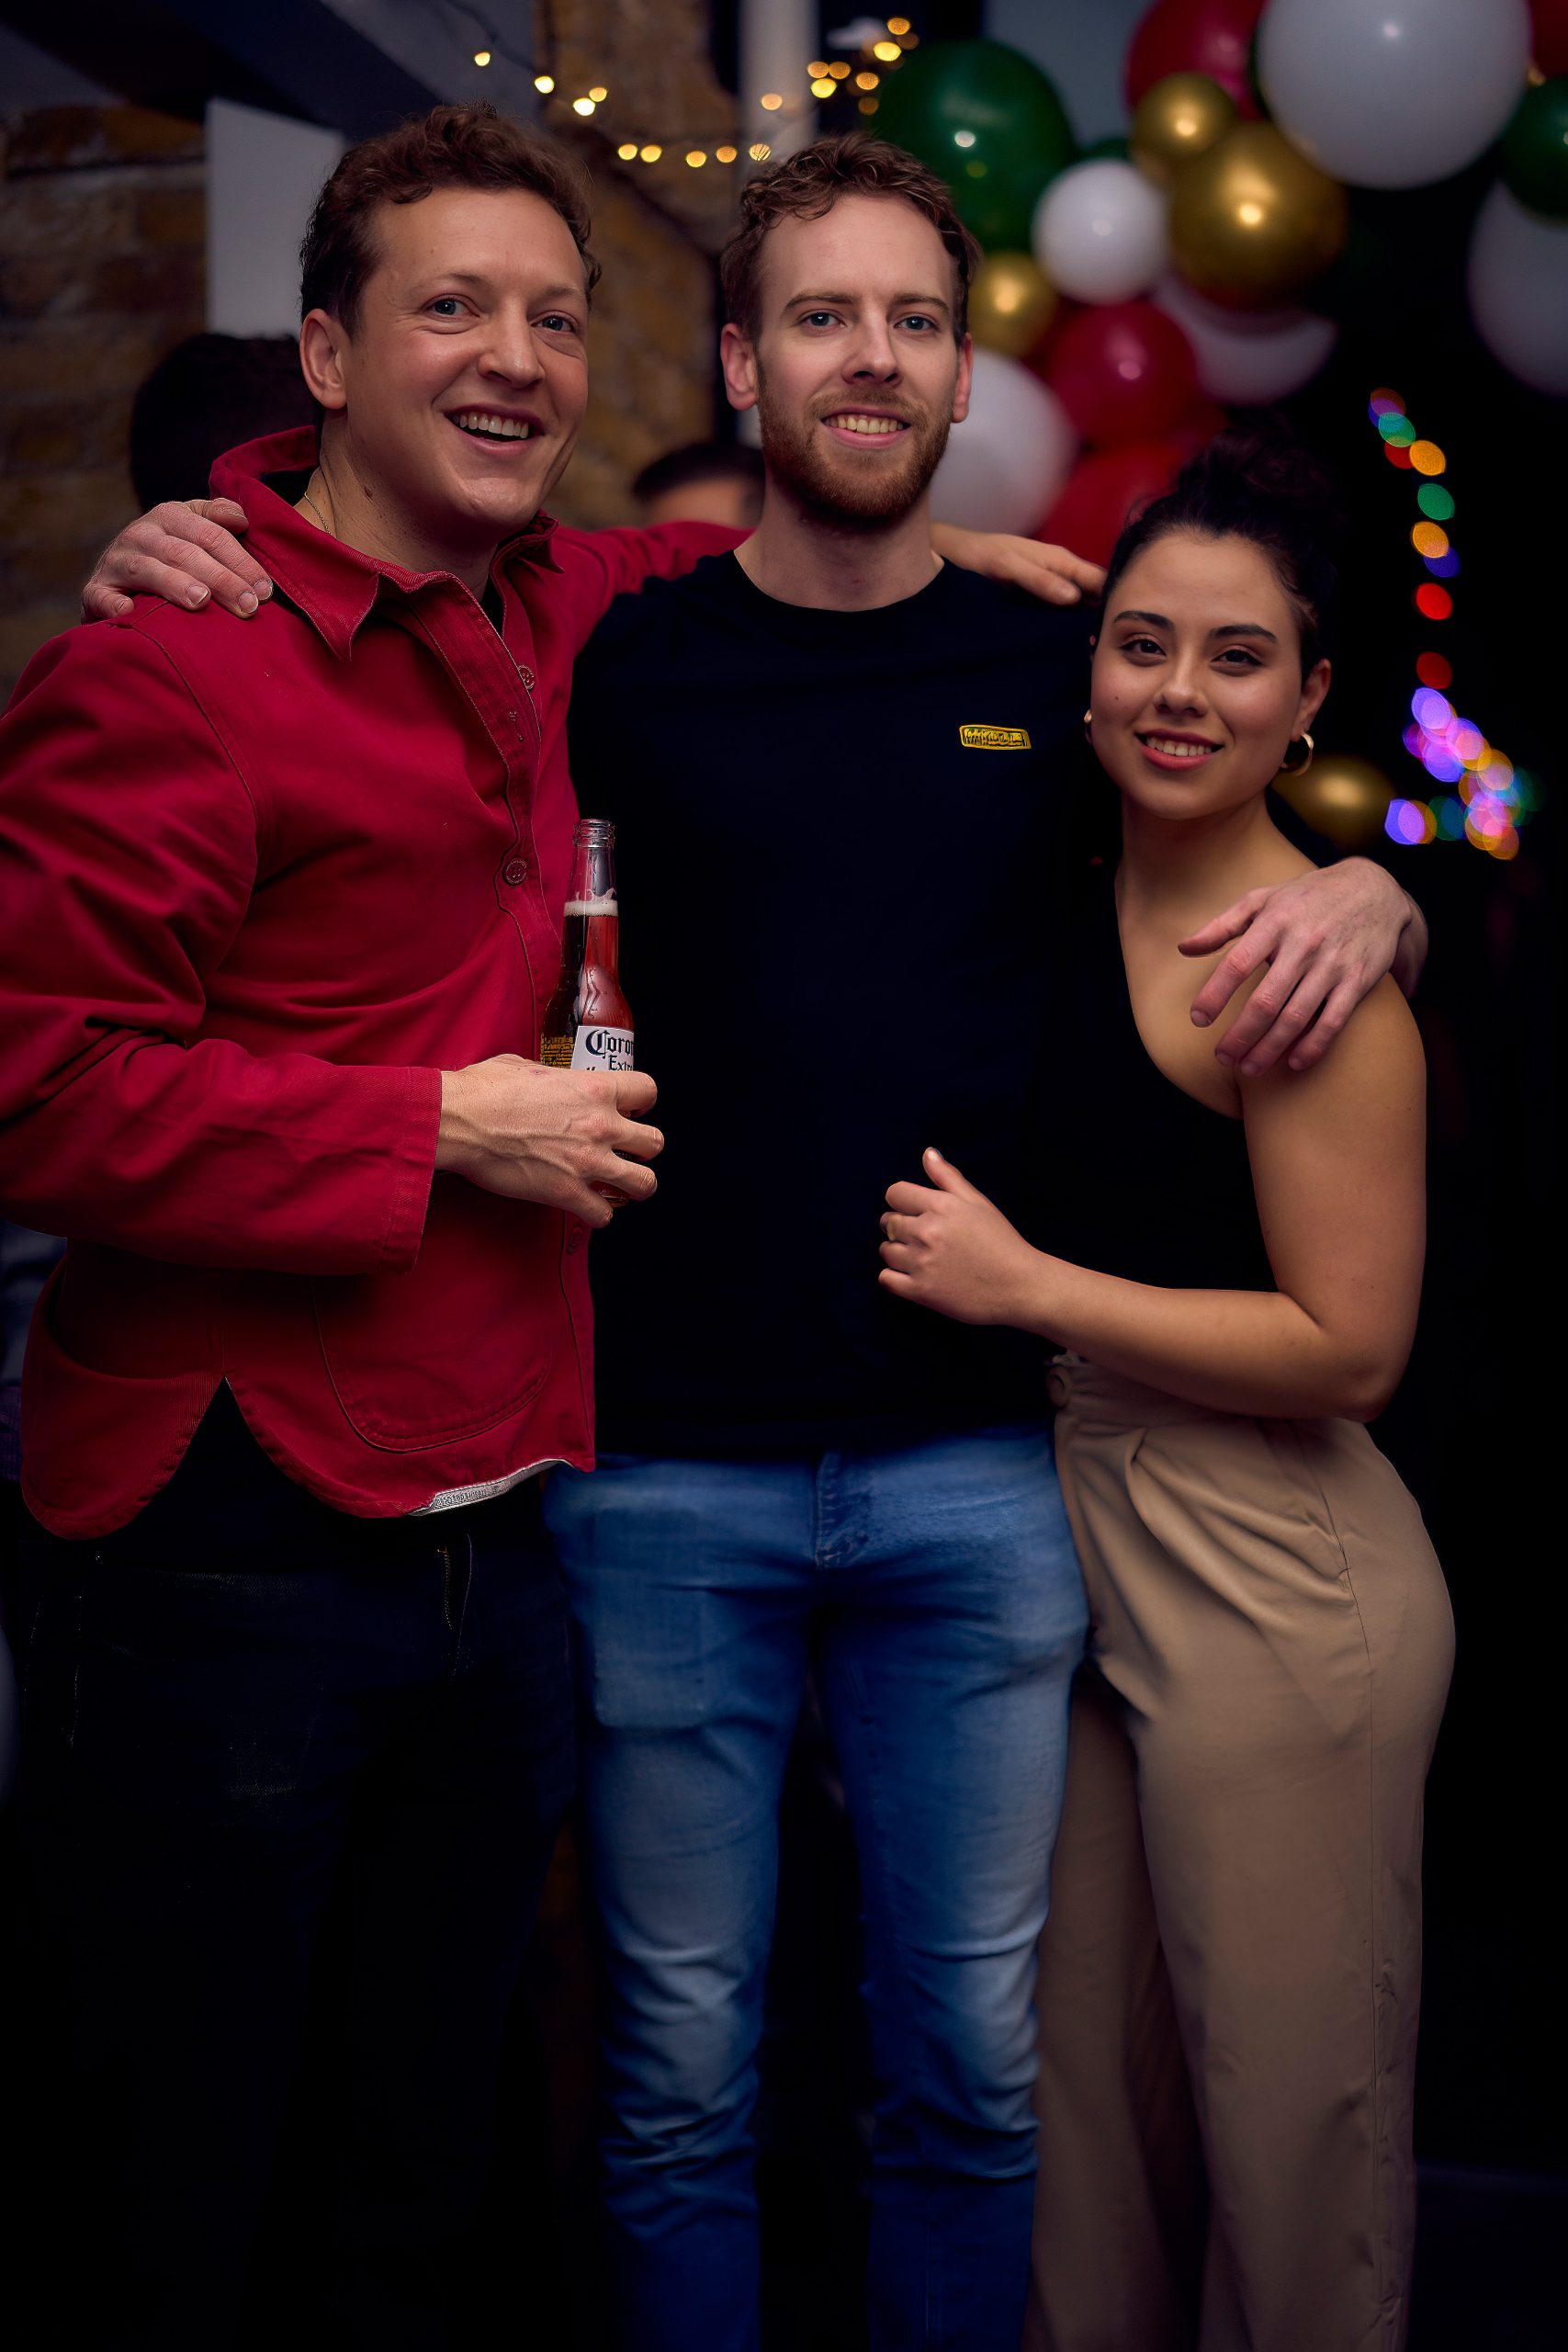 Event Crossfit Xmas party